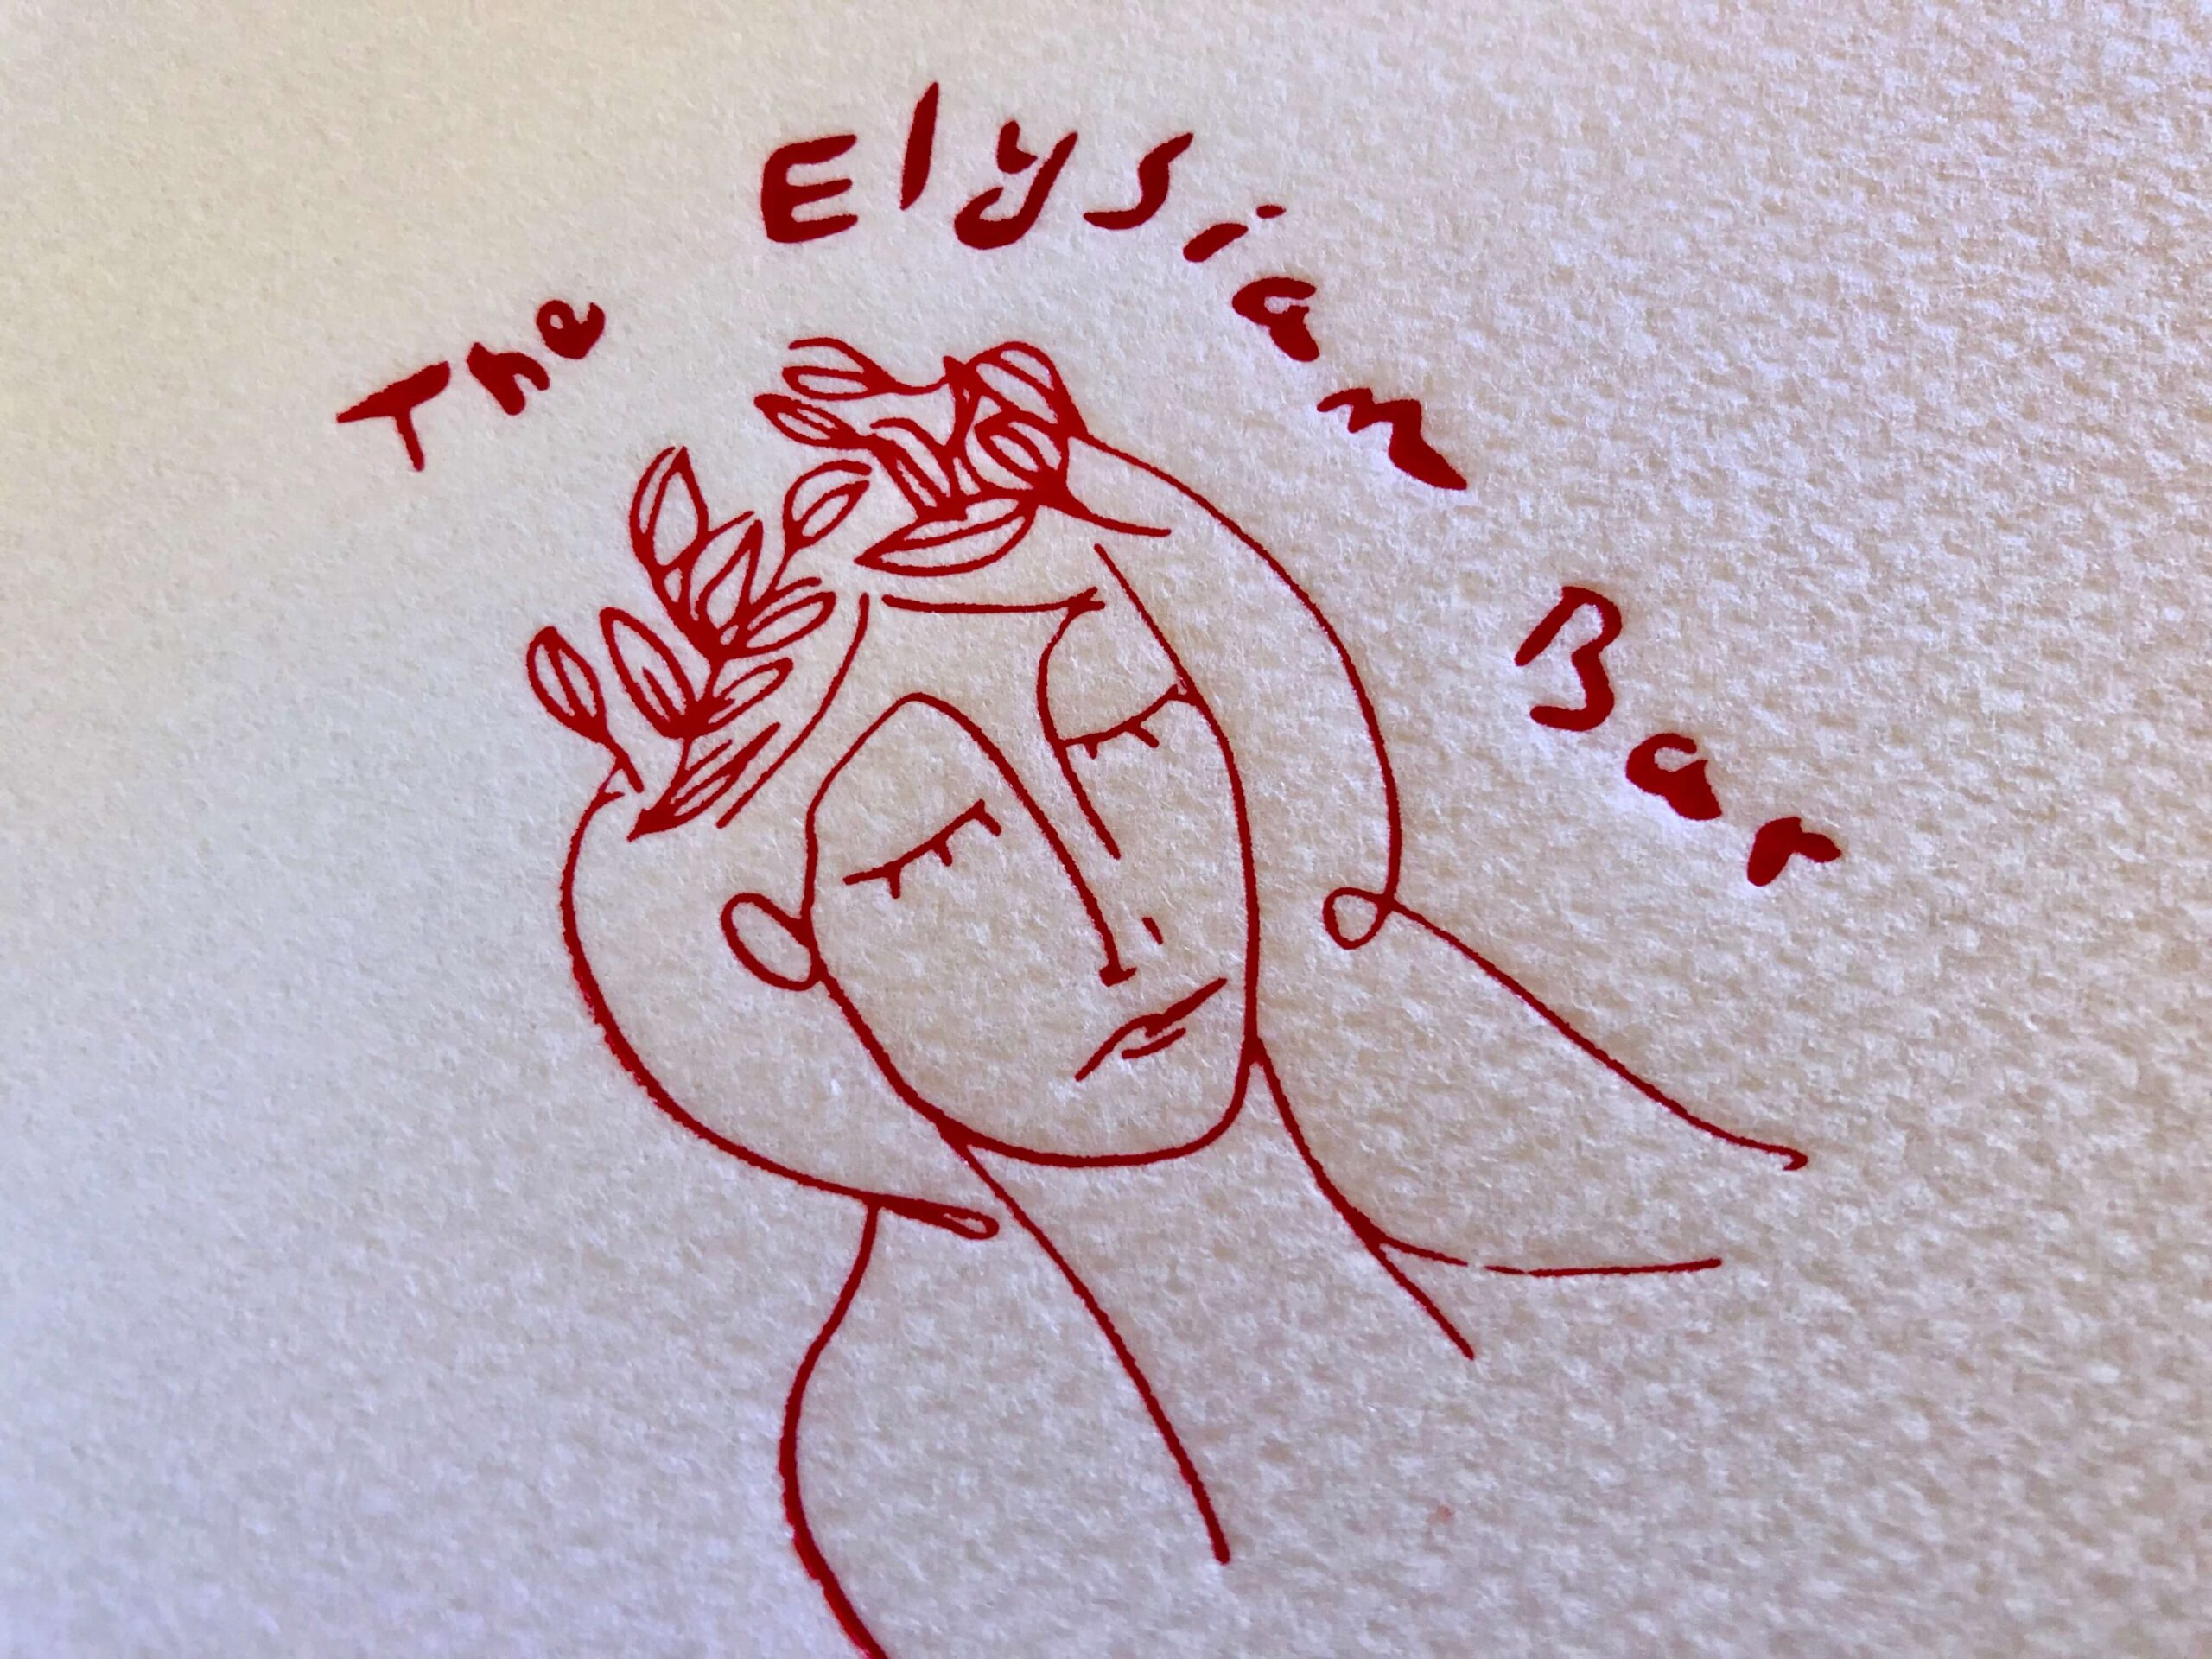 A cocktail napkin from The Elysian Bar